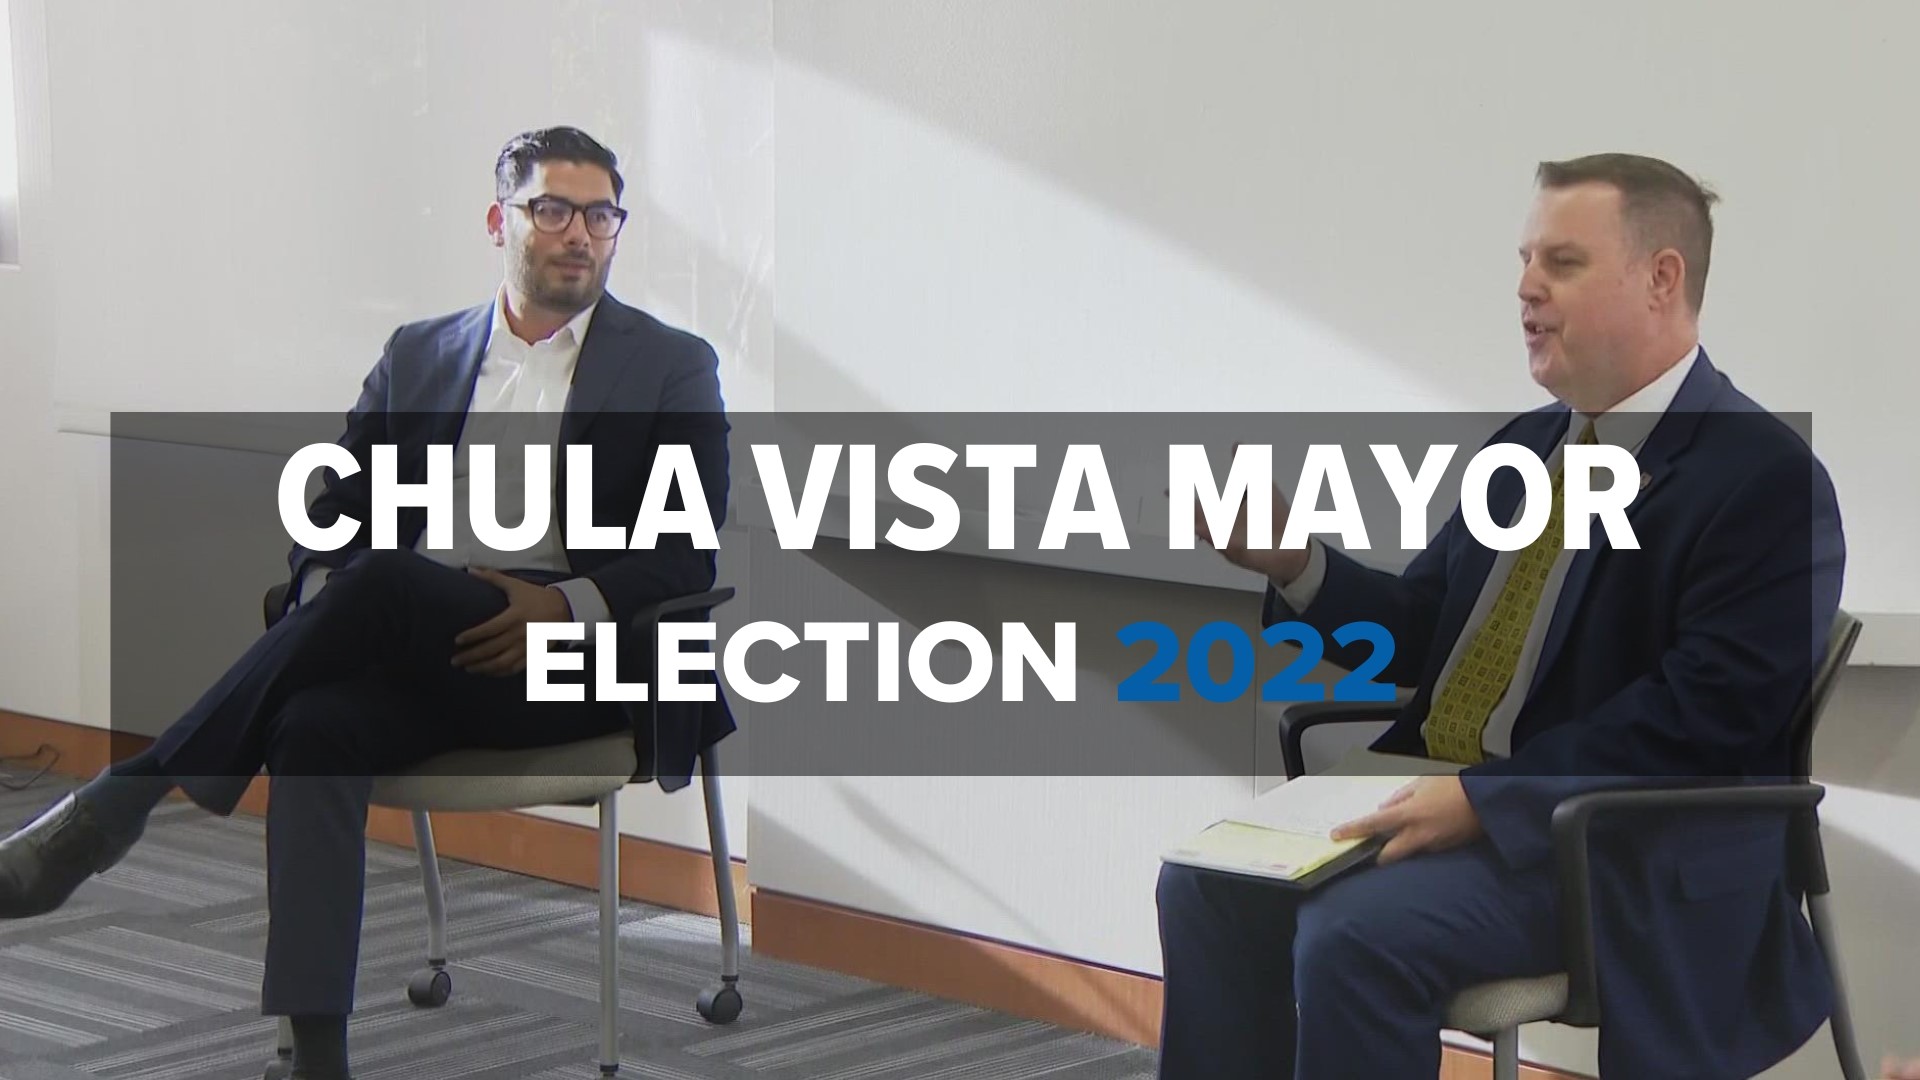 Councilmember John McCann and former Congressional candidate Ammar Campa-Najjar will face off on the ballot, vying for Chula Vista's Mayoral office this November.